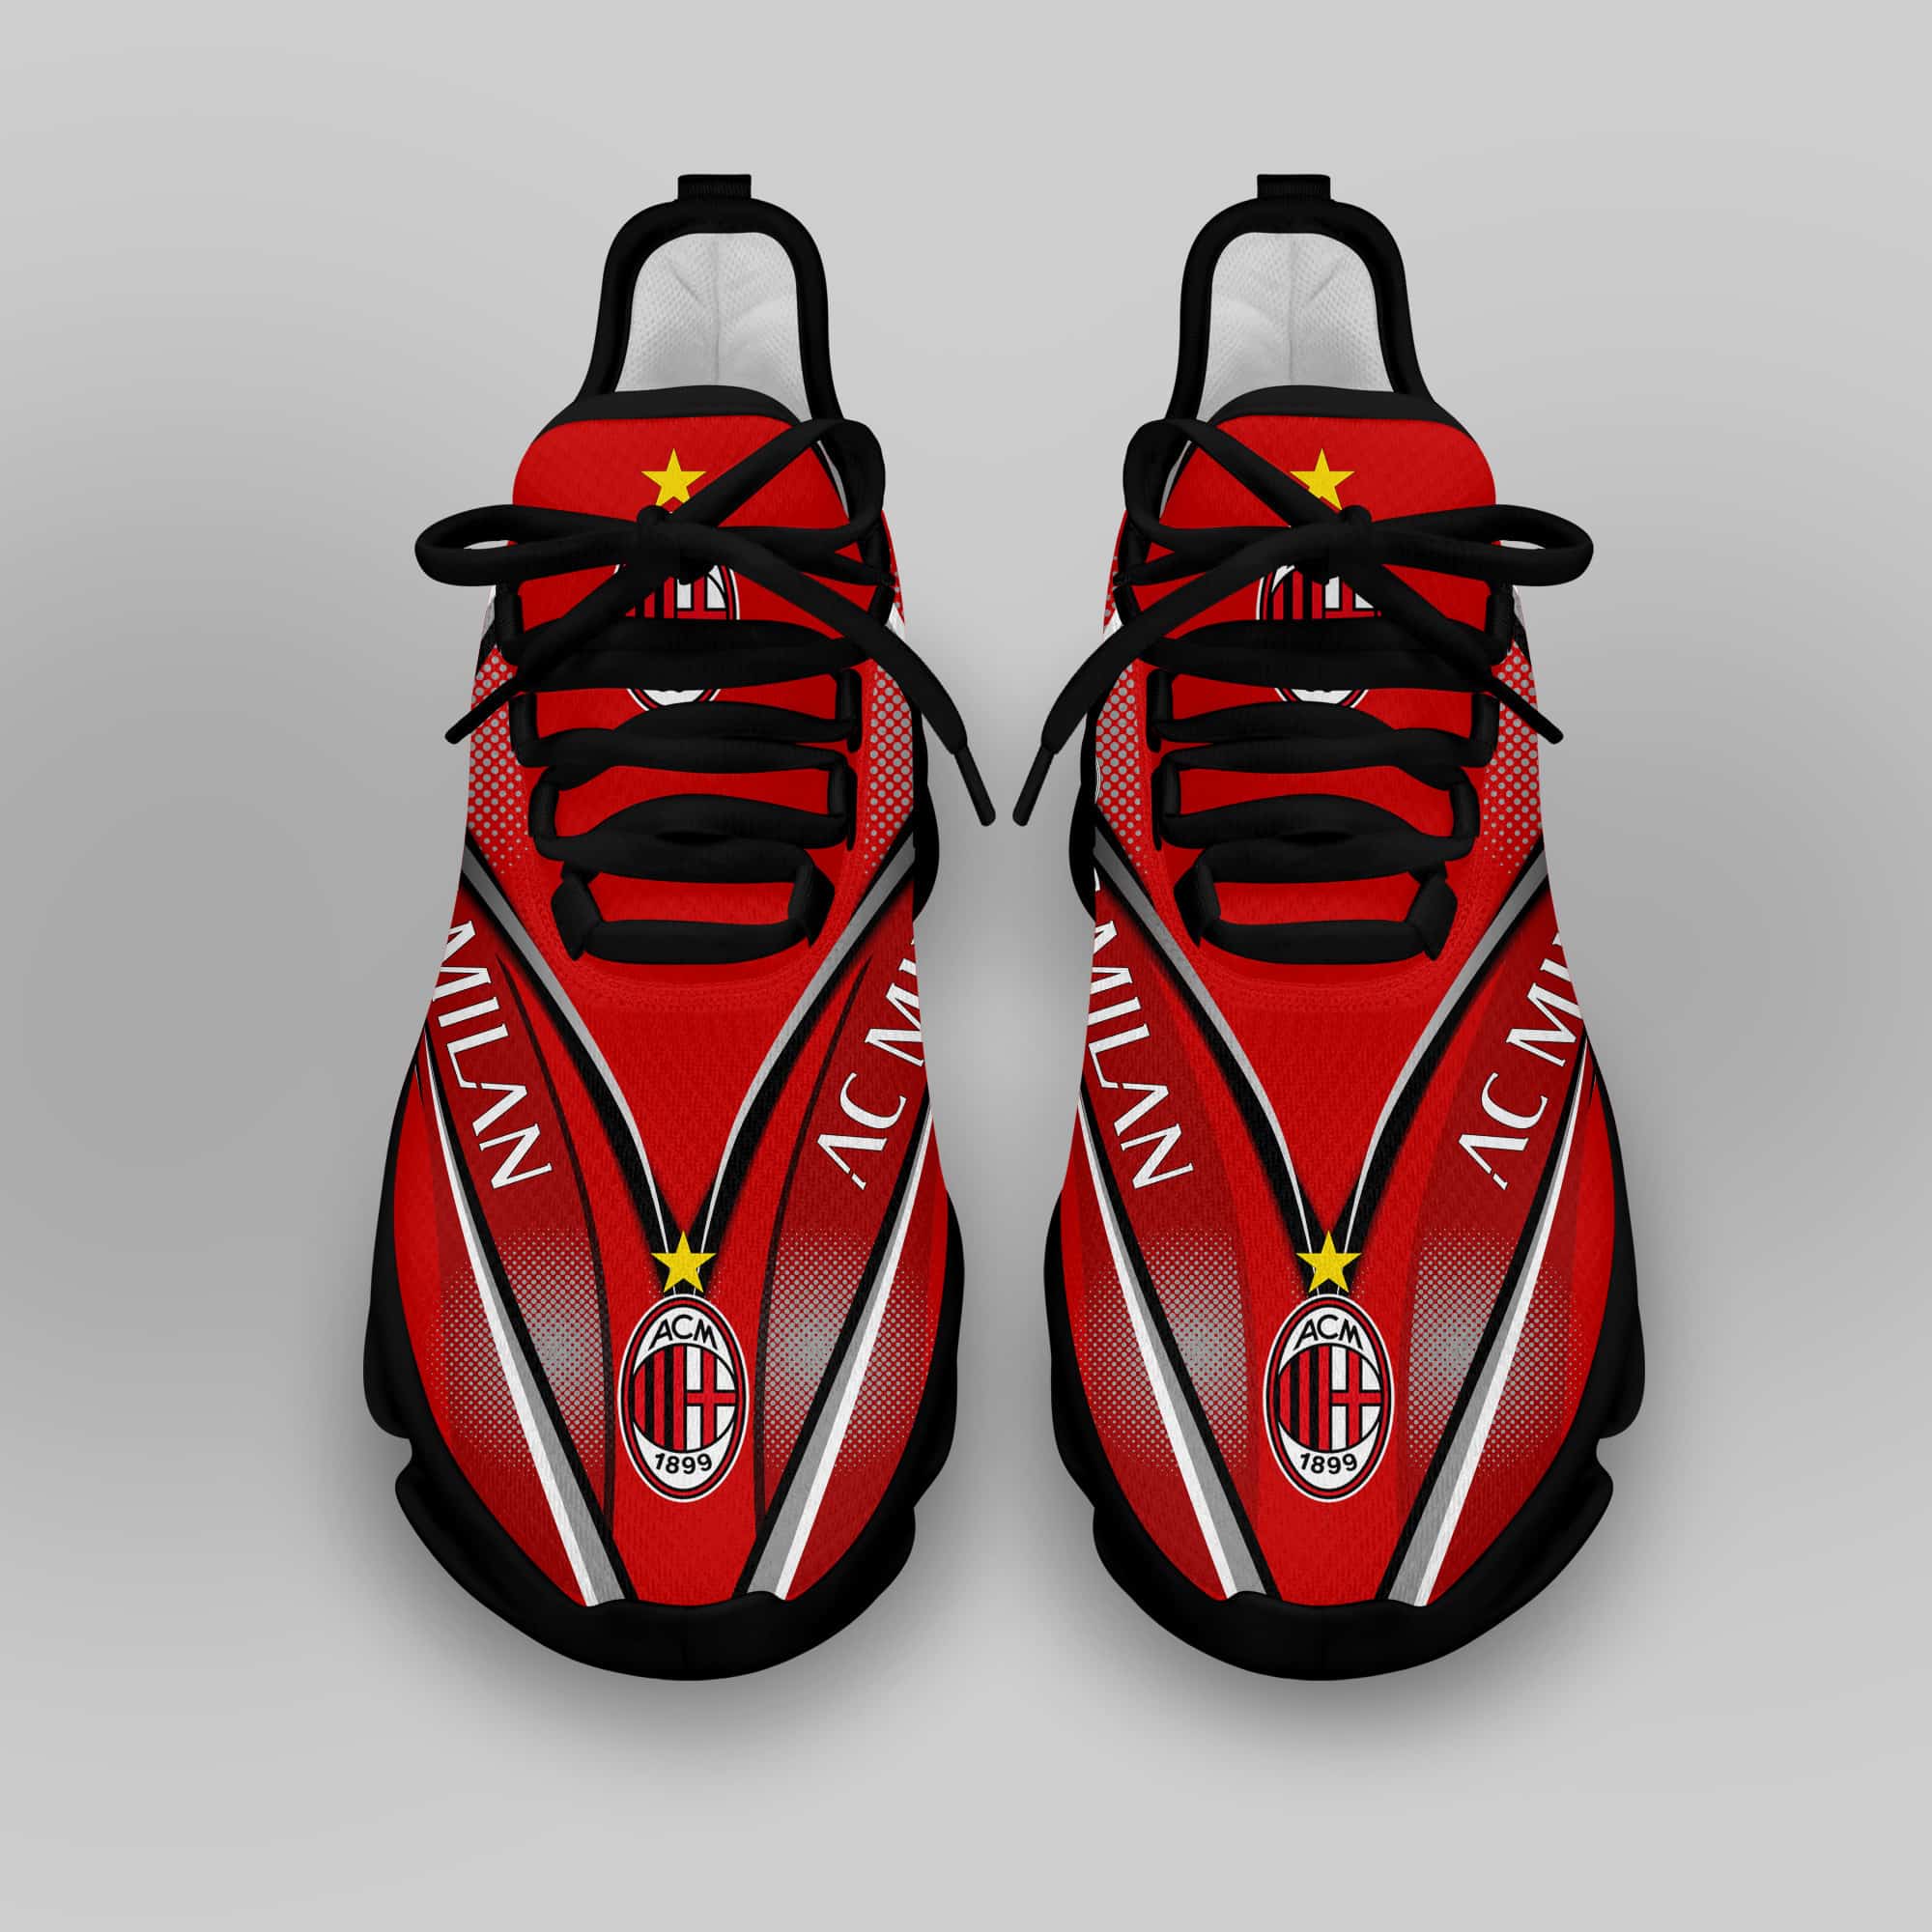 Ac Milan Running Shoes Max Soul Shoes Sneakers Ver 24 4